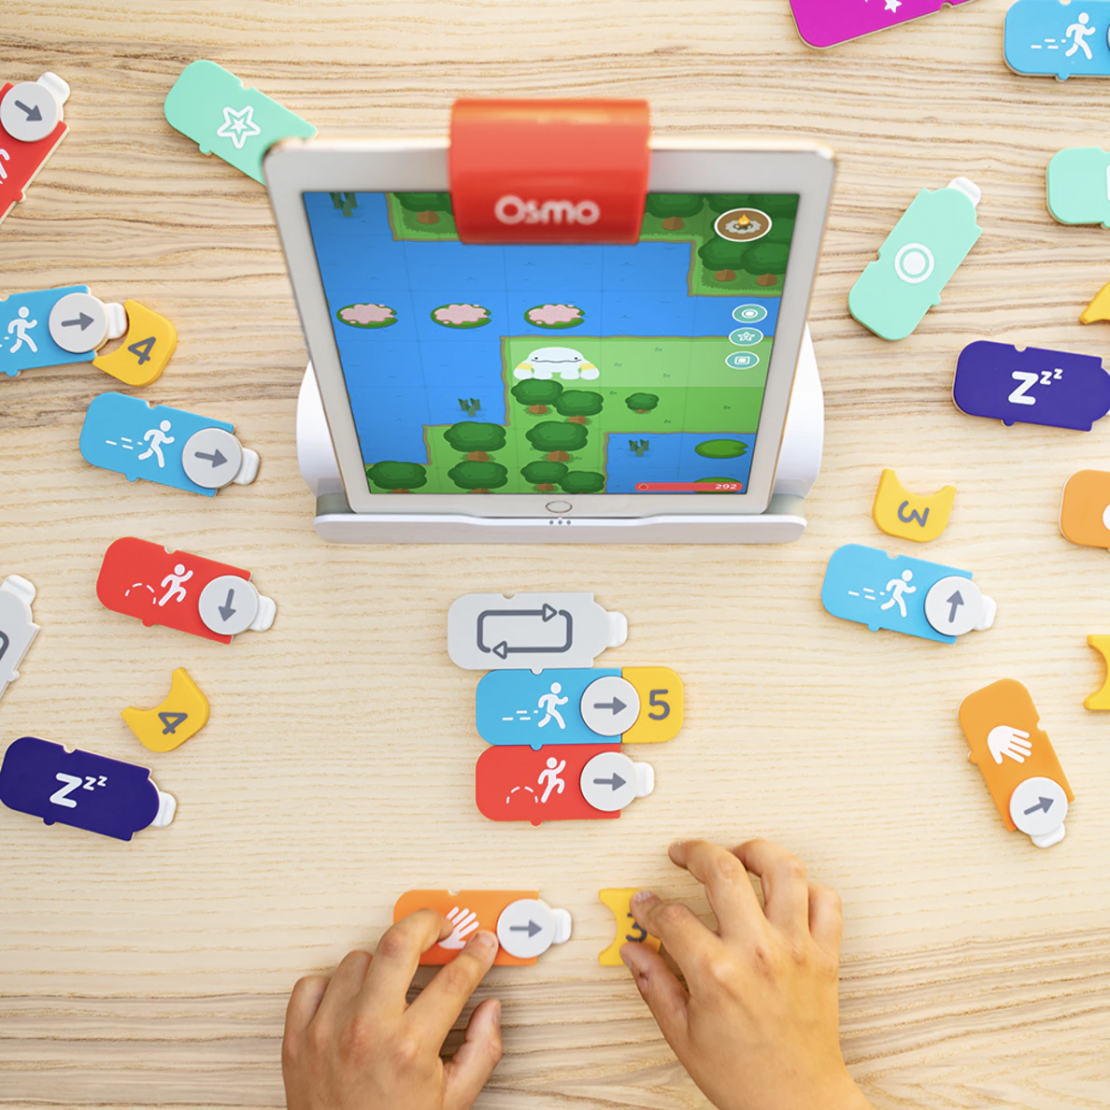 Osmo Explorer Kit STEAM learning device for tablets shown with coding blocks in play